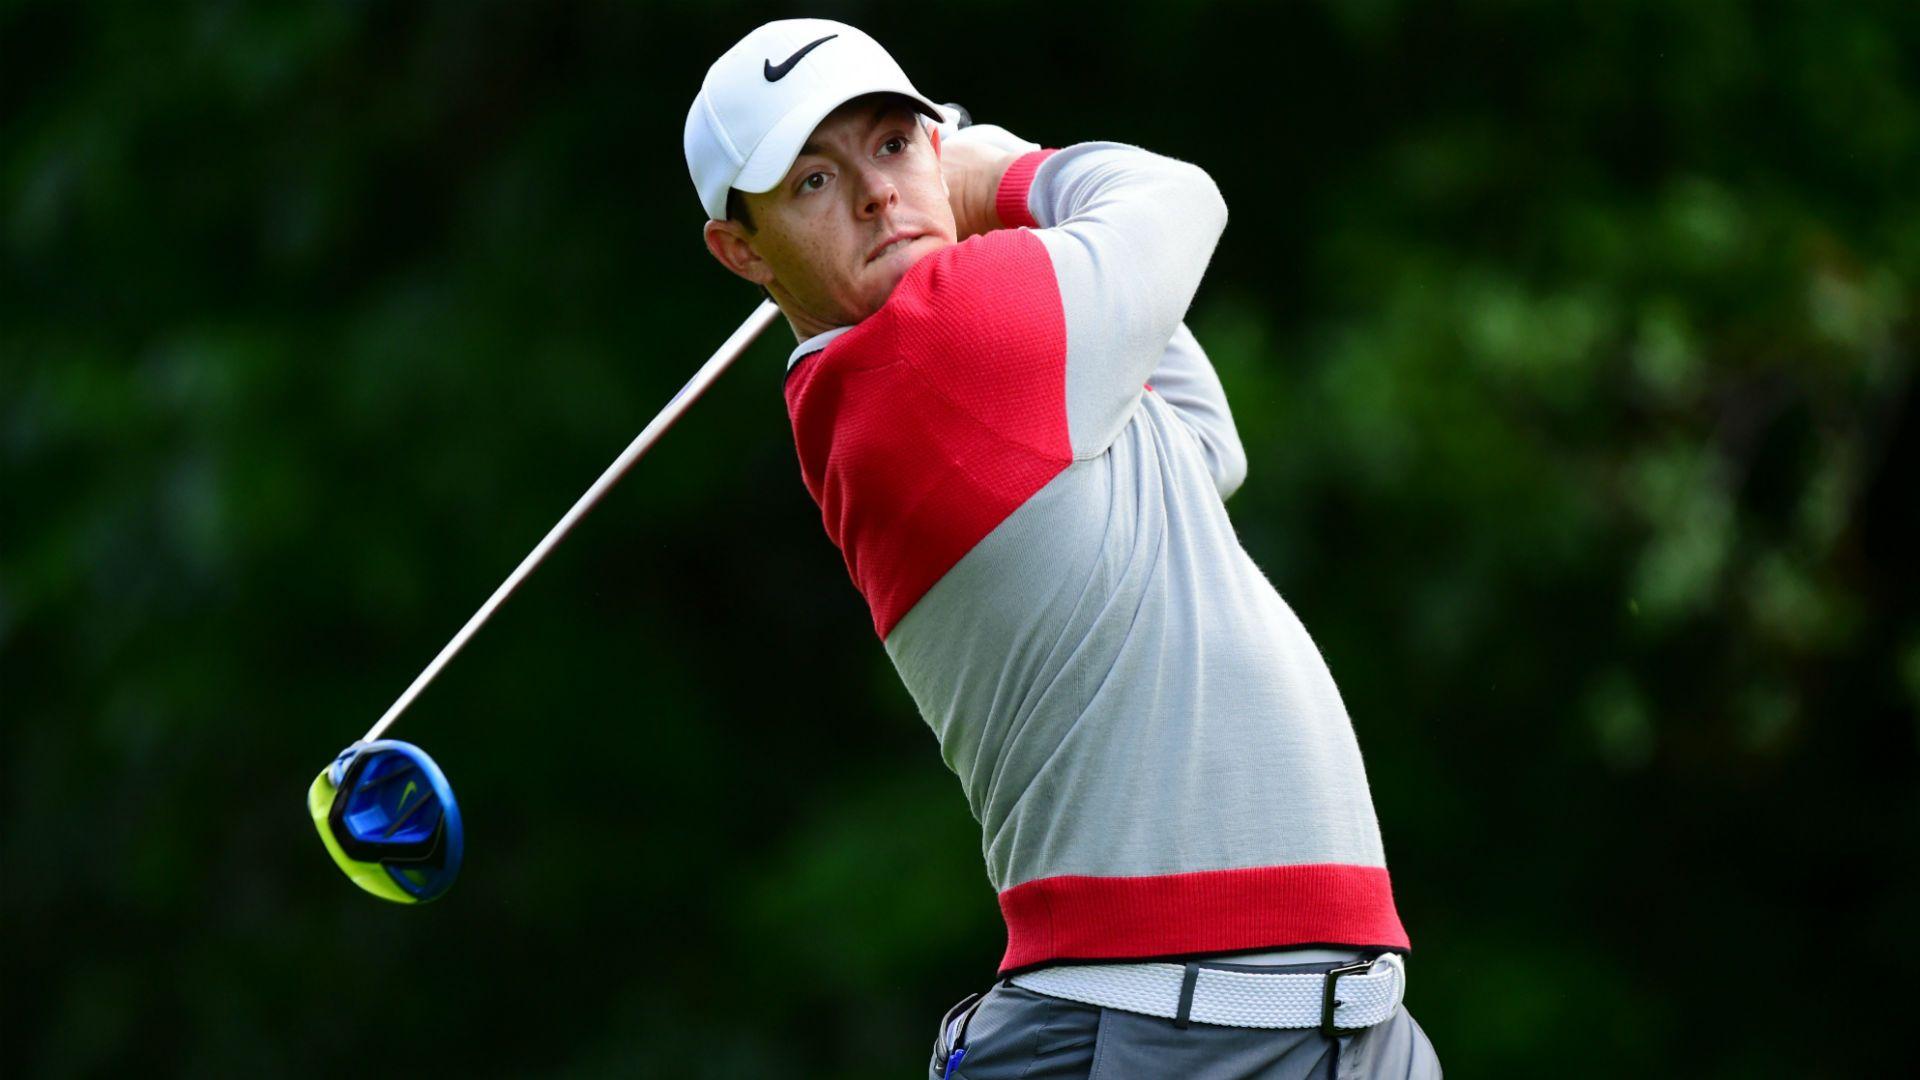 Even if Rory McIlroy had a vote, he's not sure he'd pick anyone i...